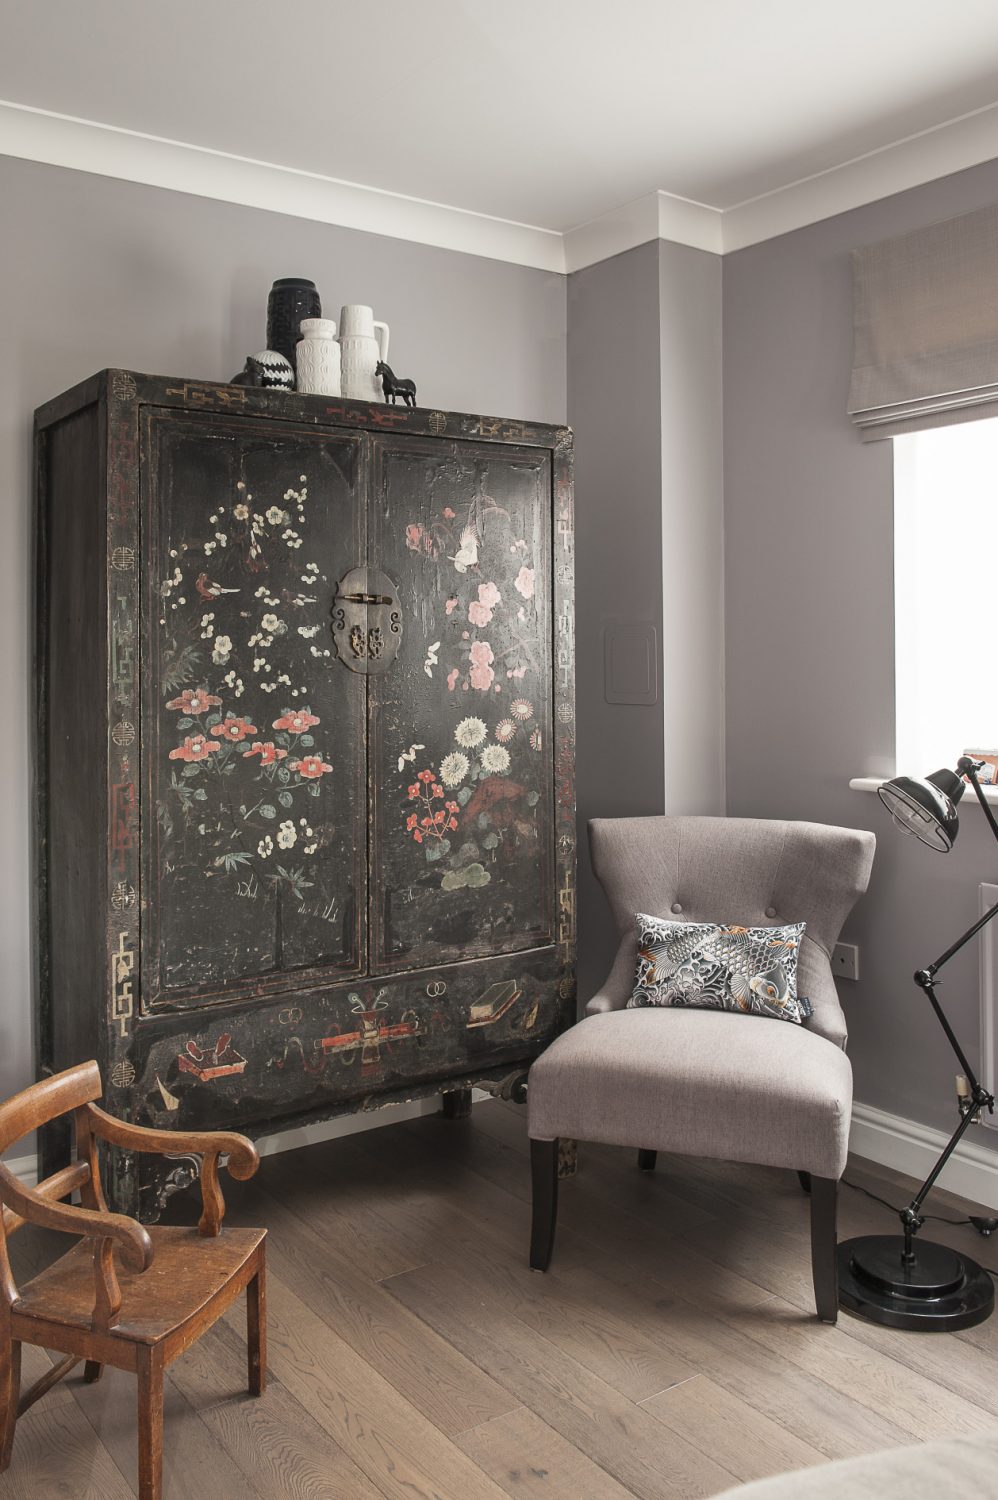 Phoebe has created a clever juxtaposition of textures, designs and patterns from inlaid chairs and an oriental cupboard to a sequinned Jean Paul Gaultier cushion